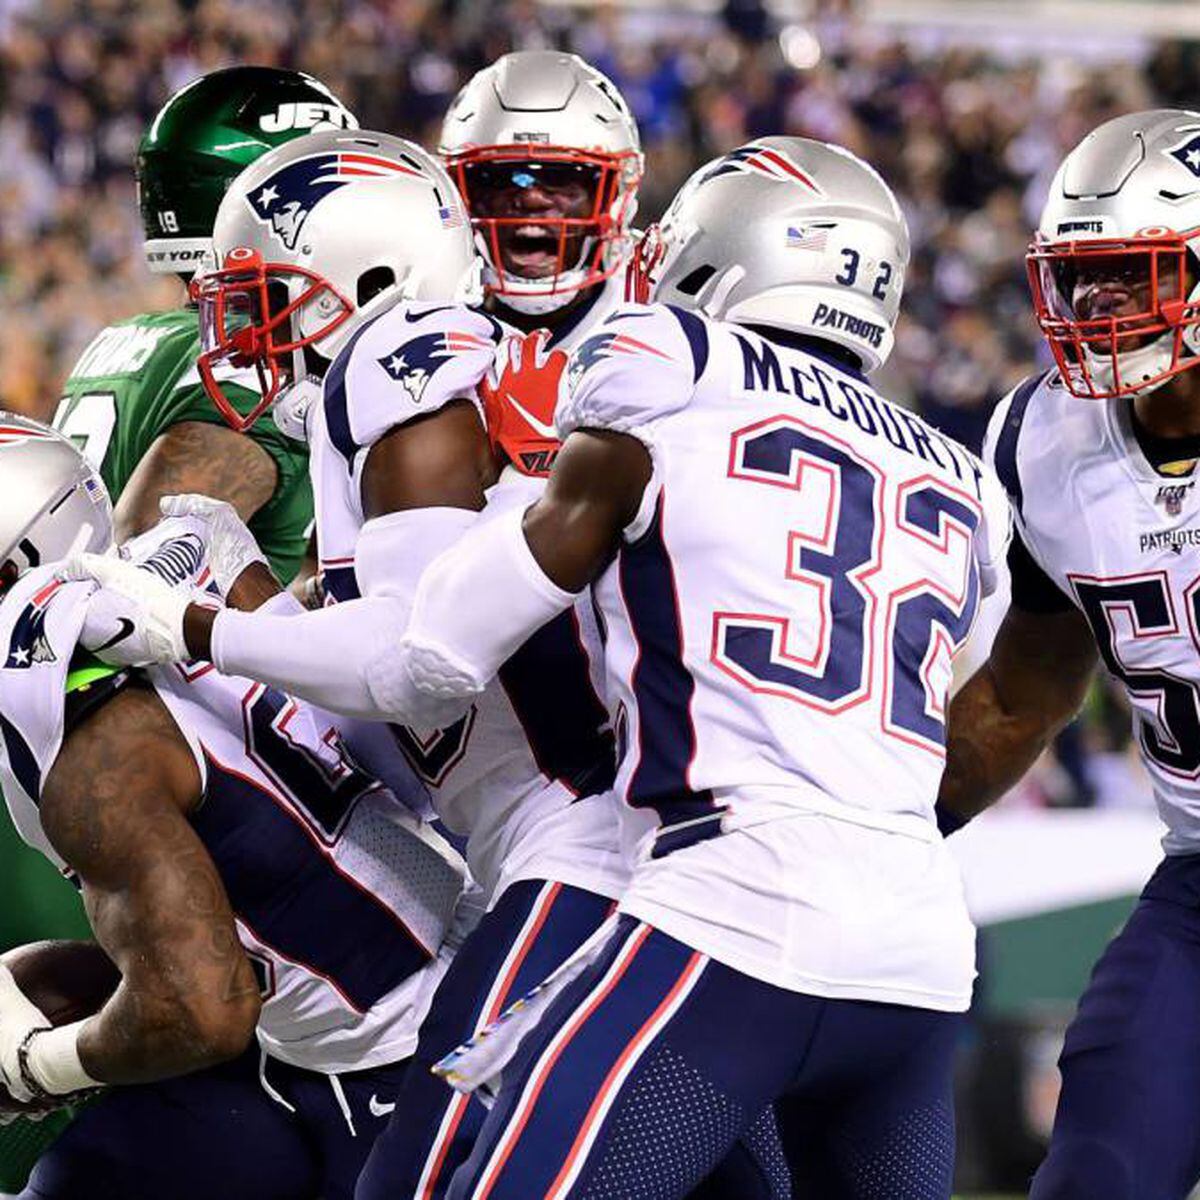 Patriots vs. Jets live stream: How to watch NFL Week 3 game on TV, online –  NBC Sports Boston